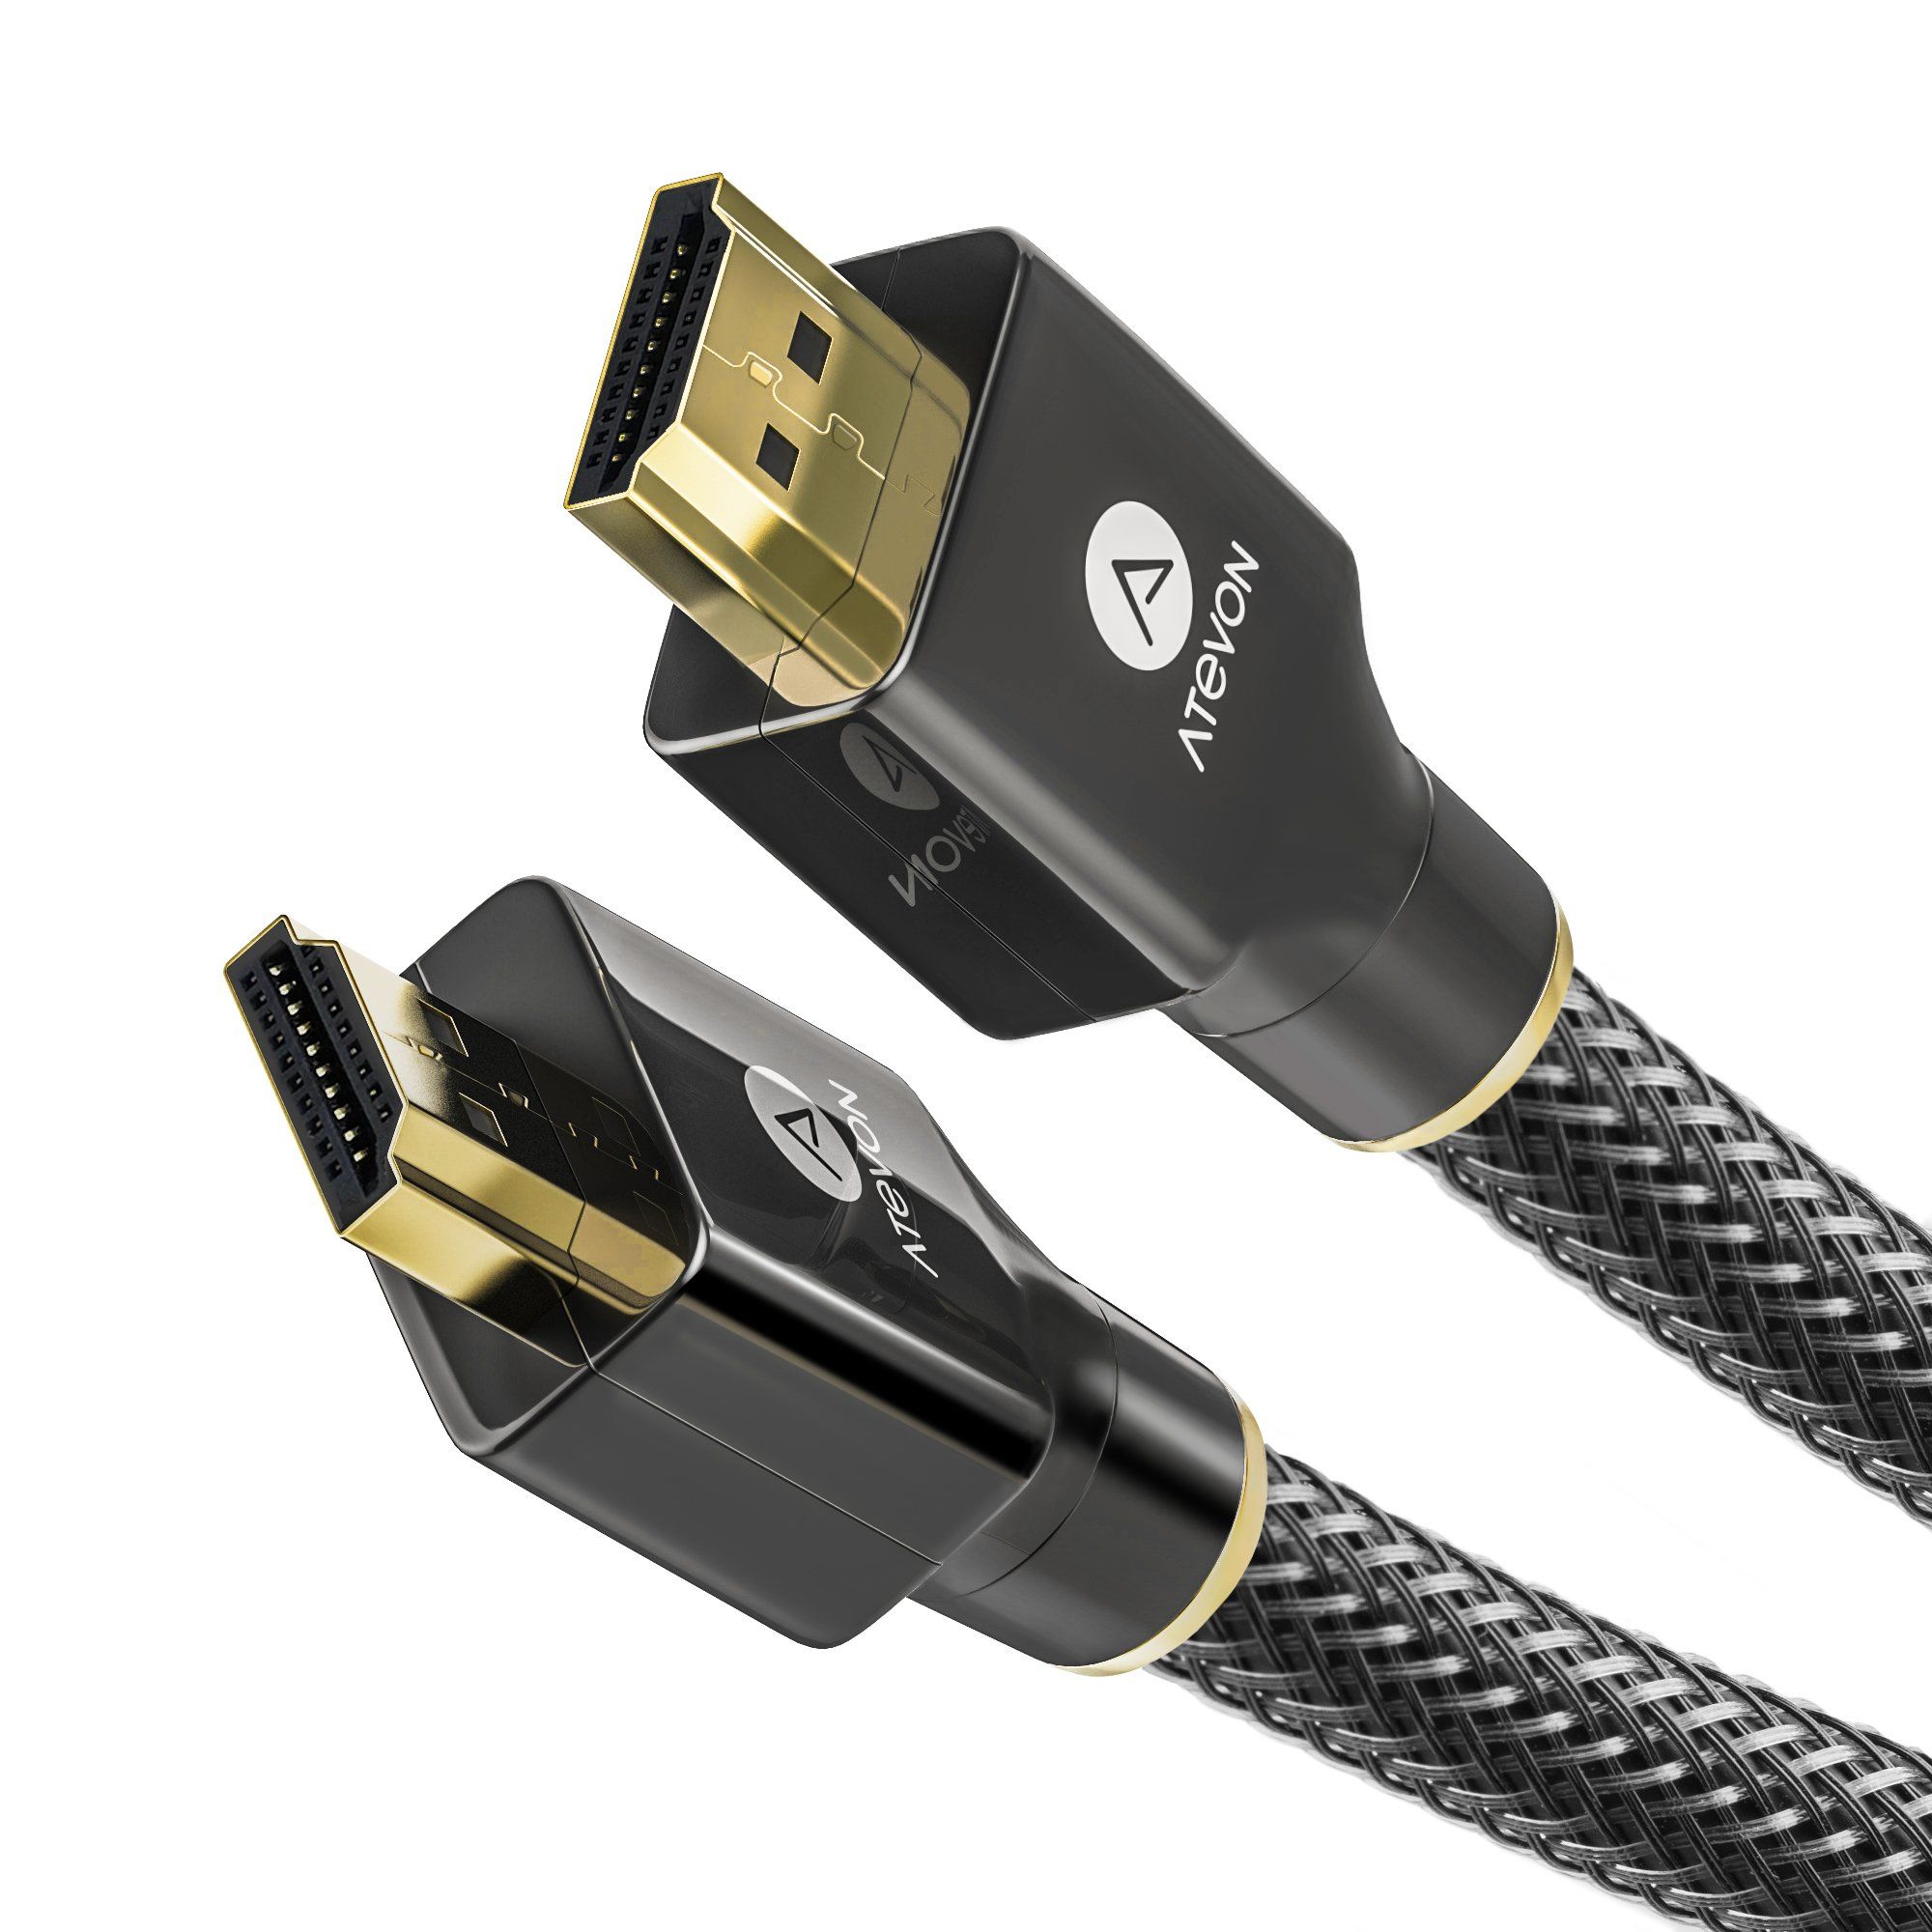 Best HDMI Cables (Updated 2020)